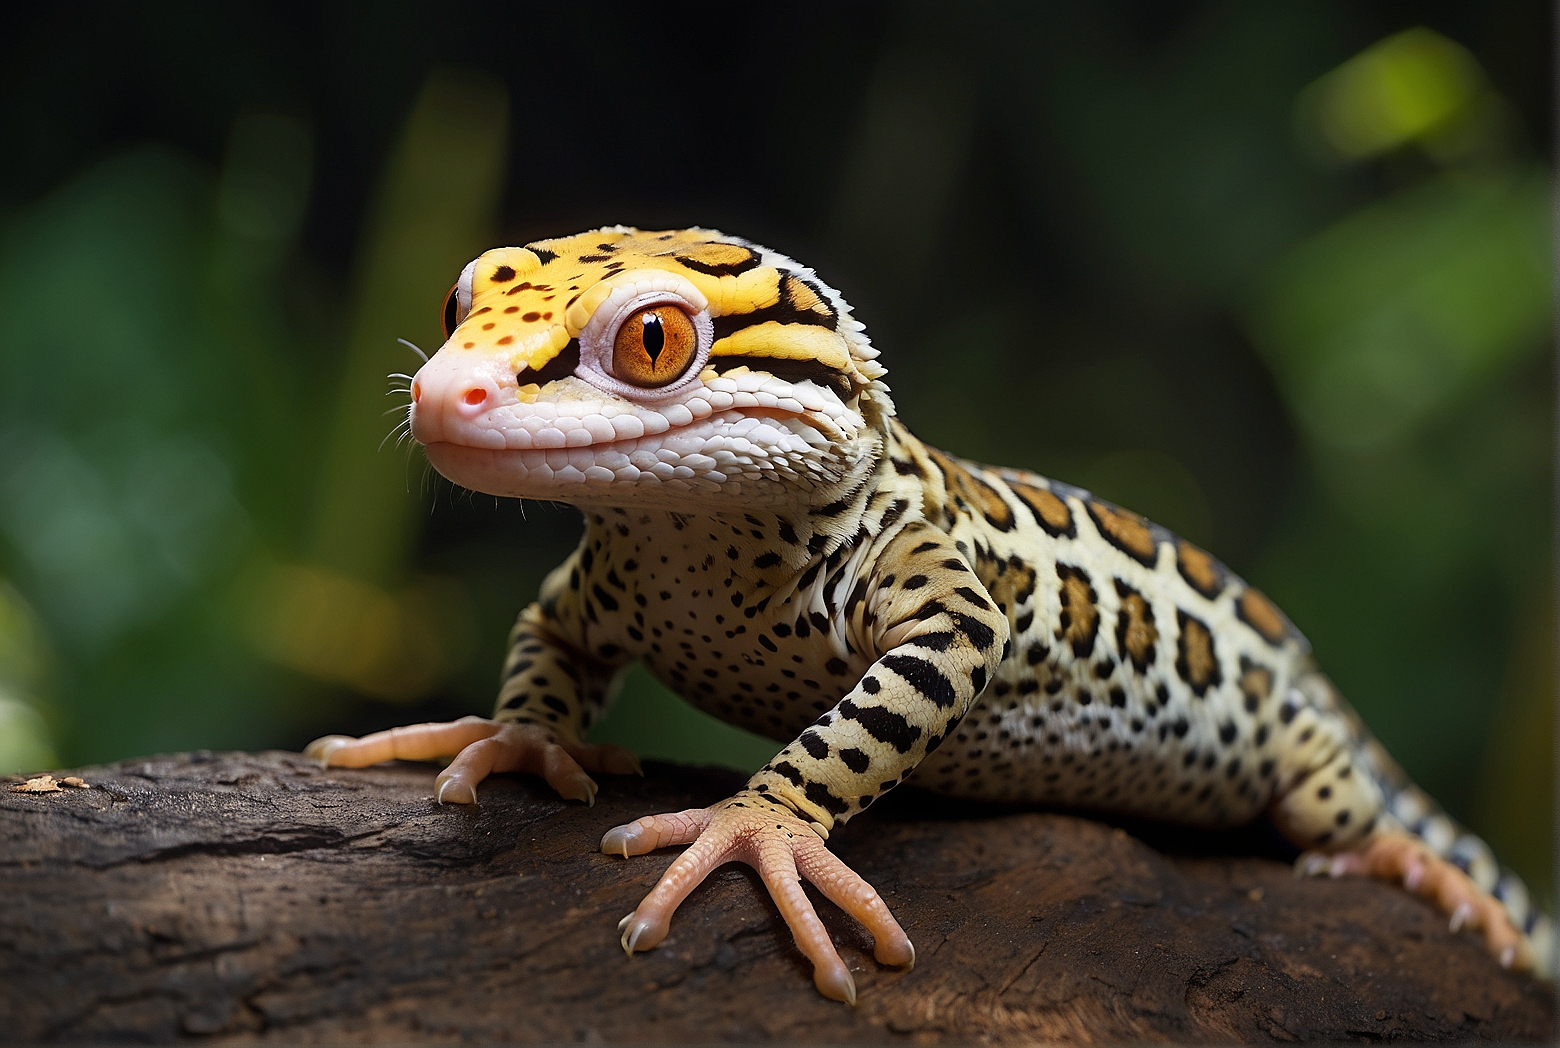 Can Leopard Geckos Live 30 Years?